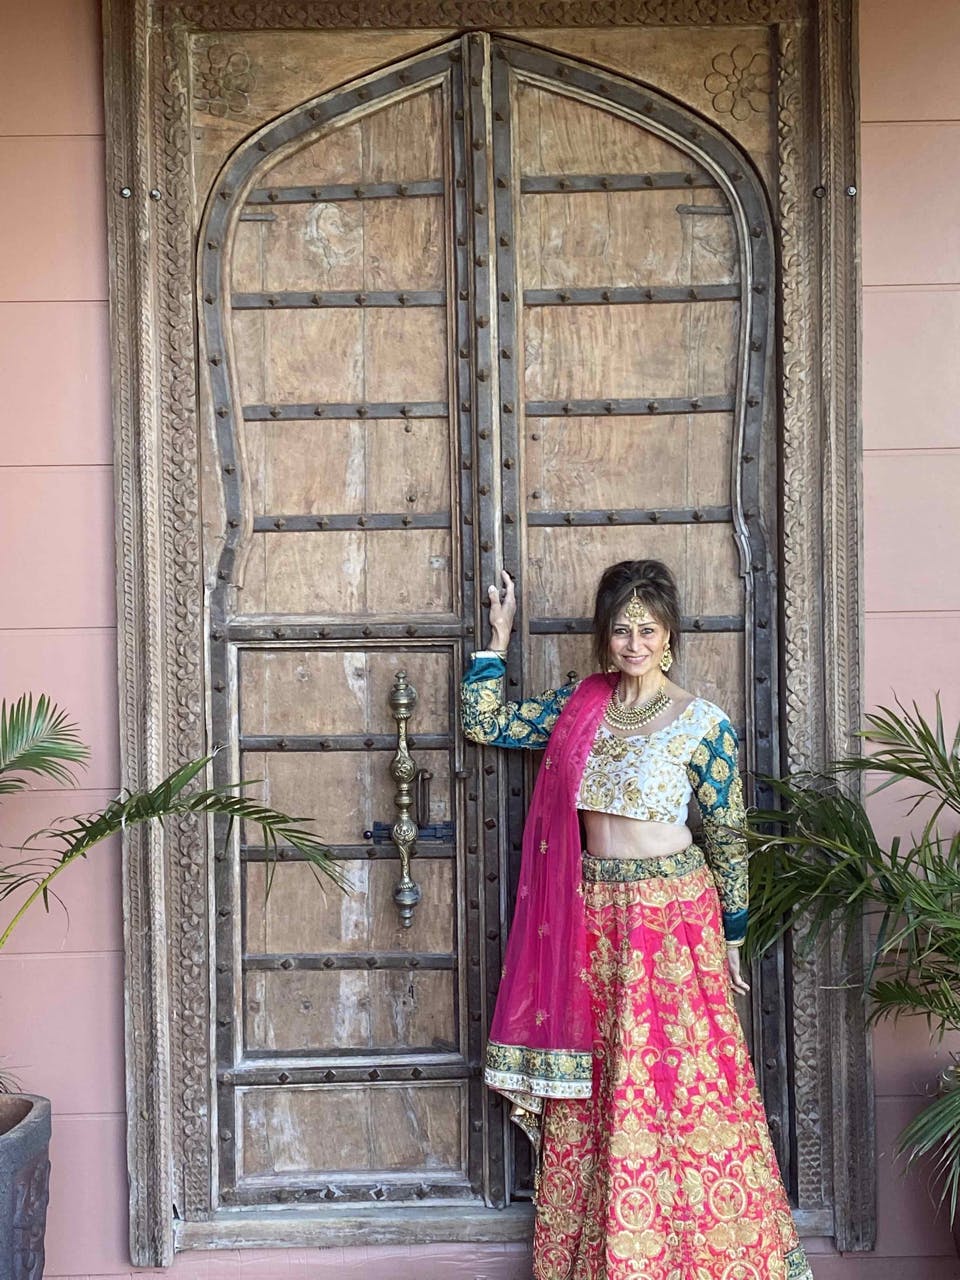 The love of my life for the past 38 years in front of the Lotus Suite haveli door, amazing getaway